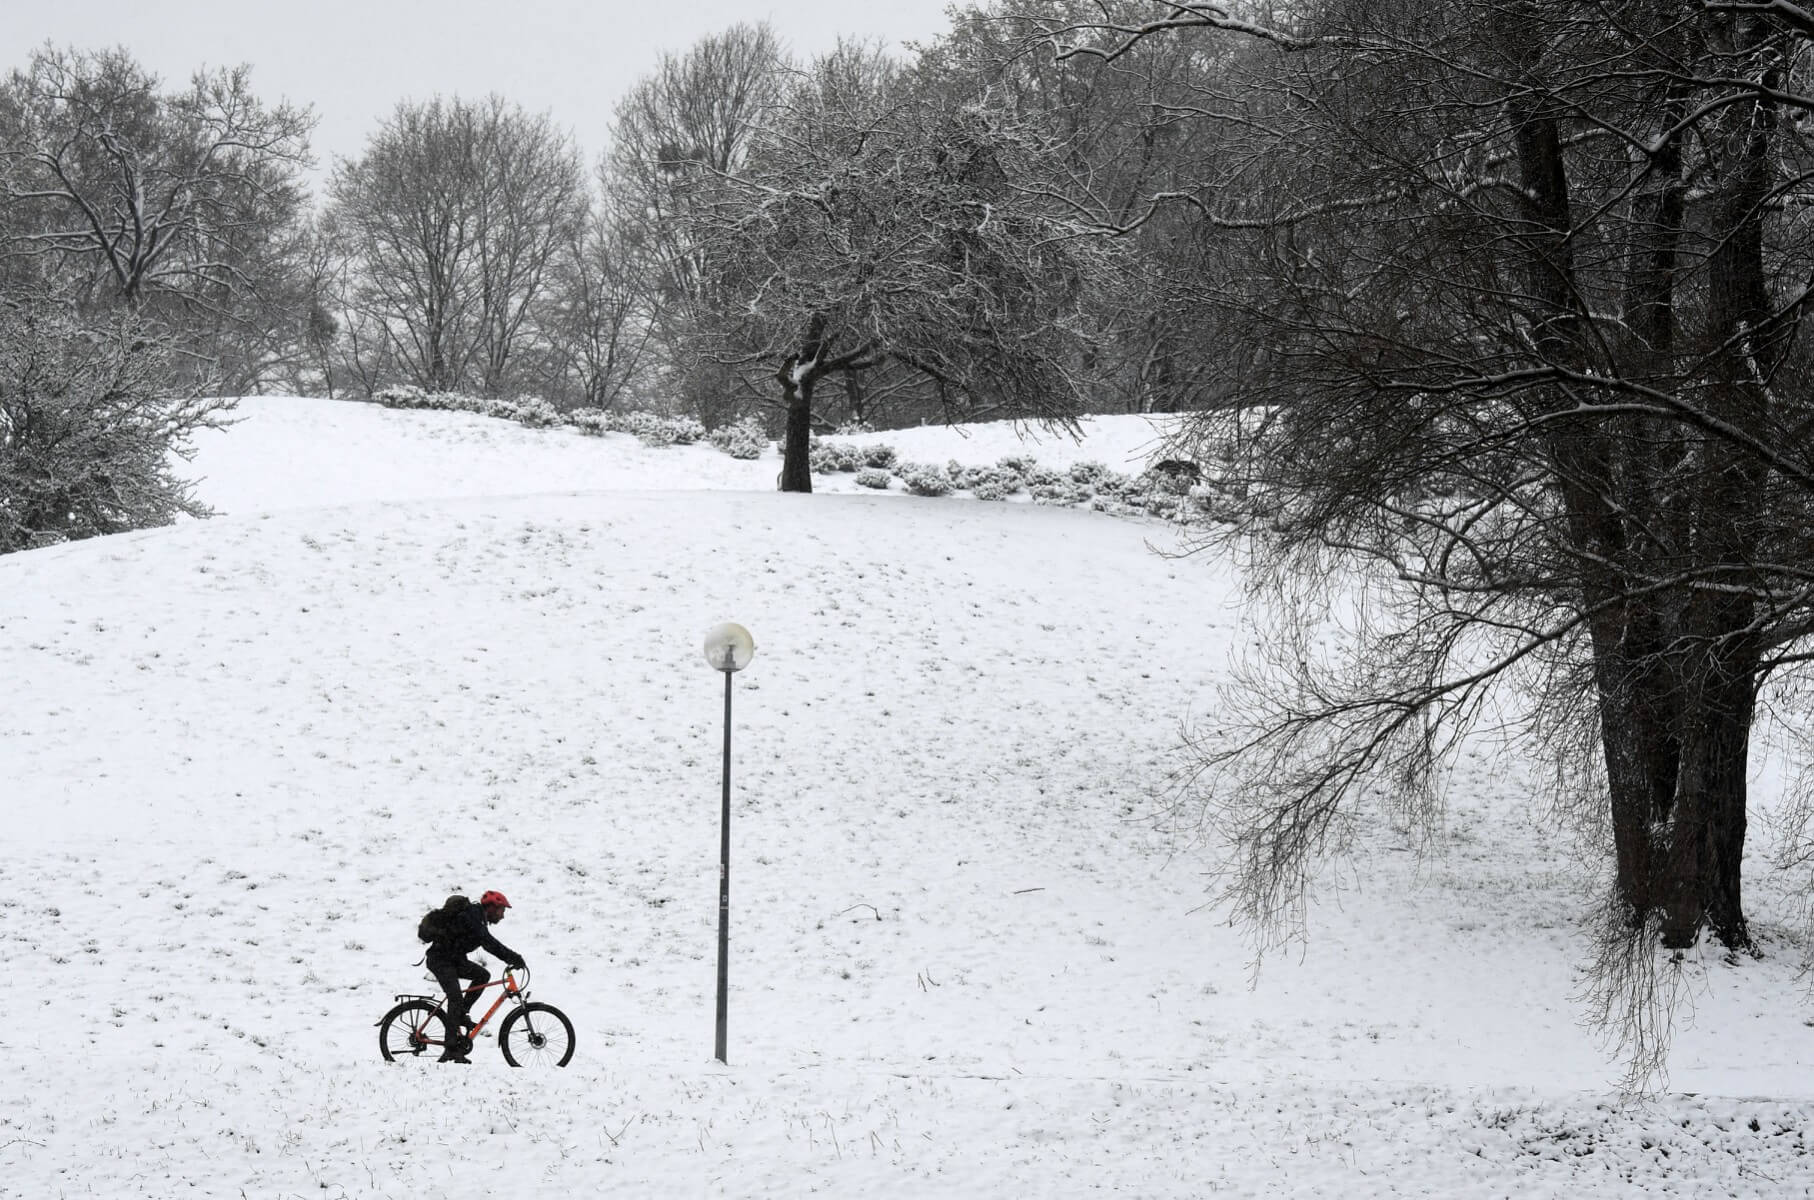 Germany braces for plunging temperatures and heavy snow